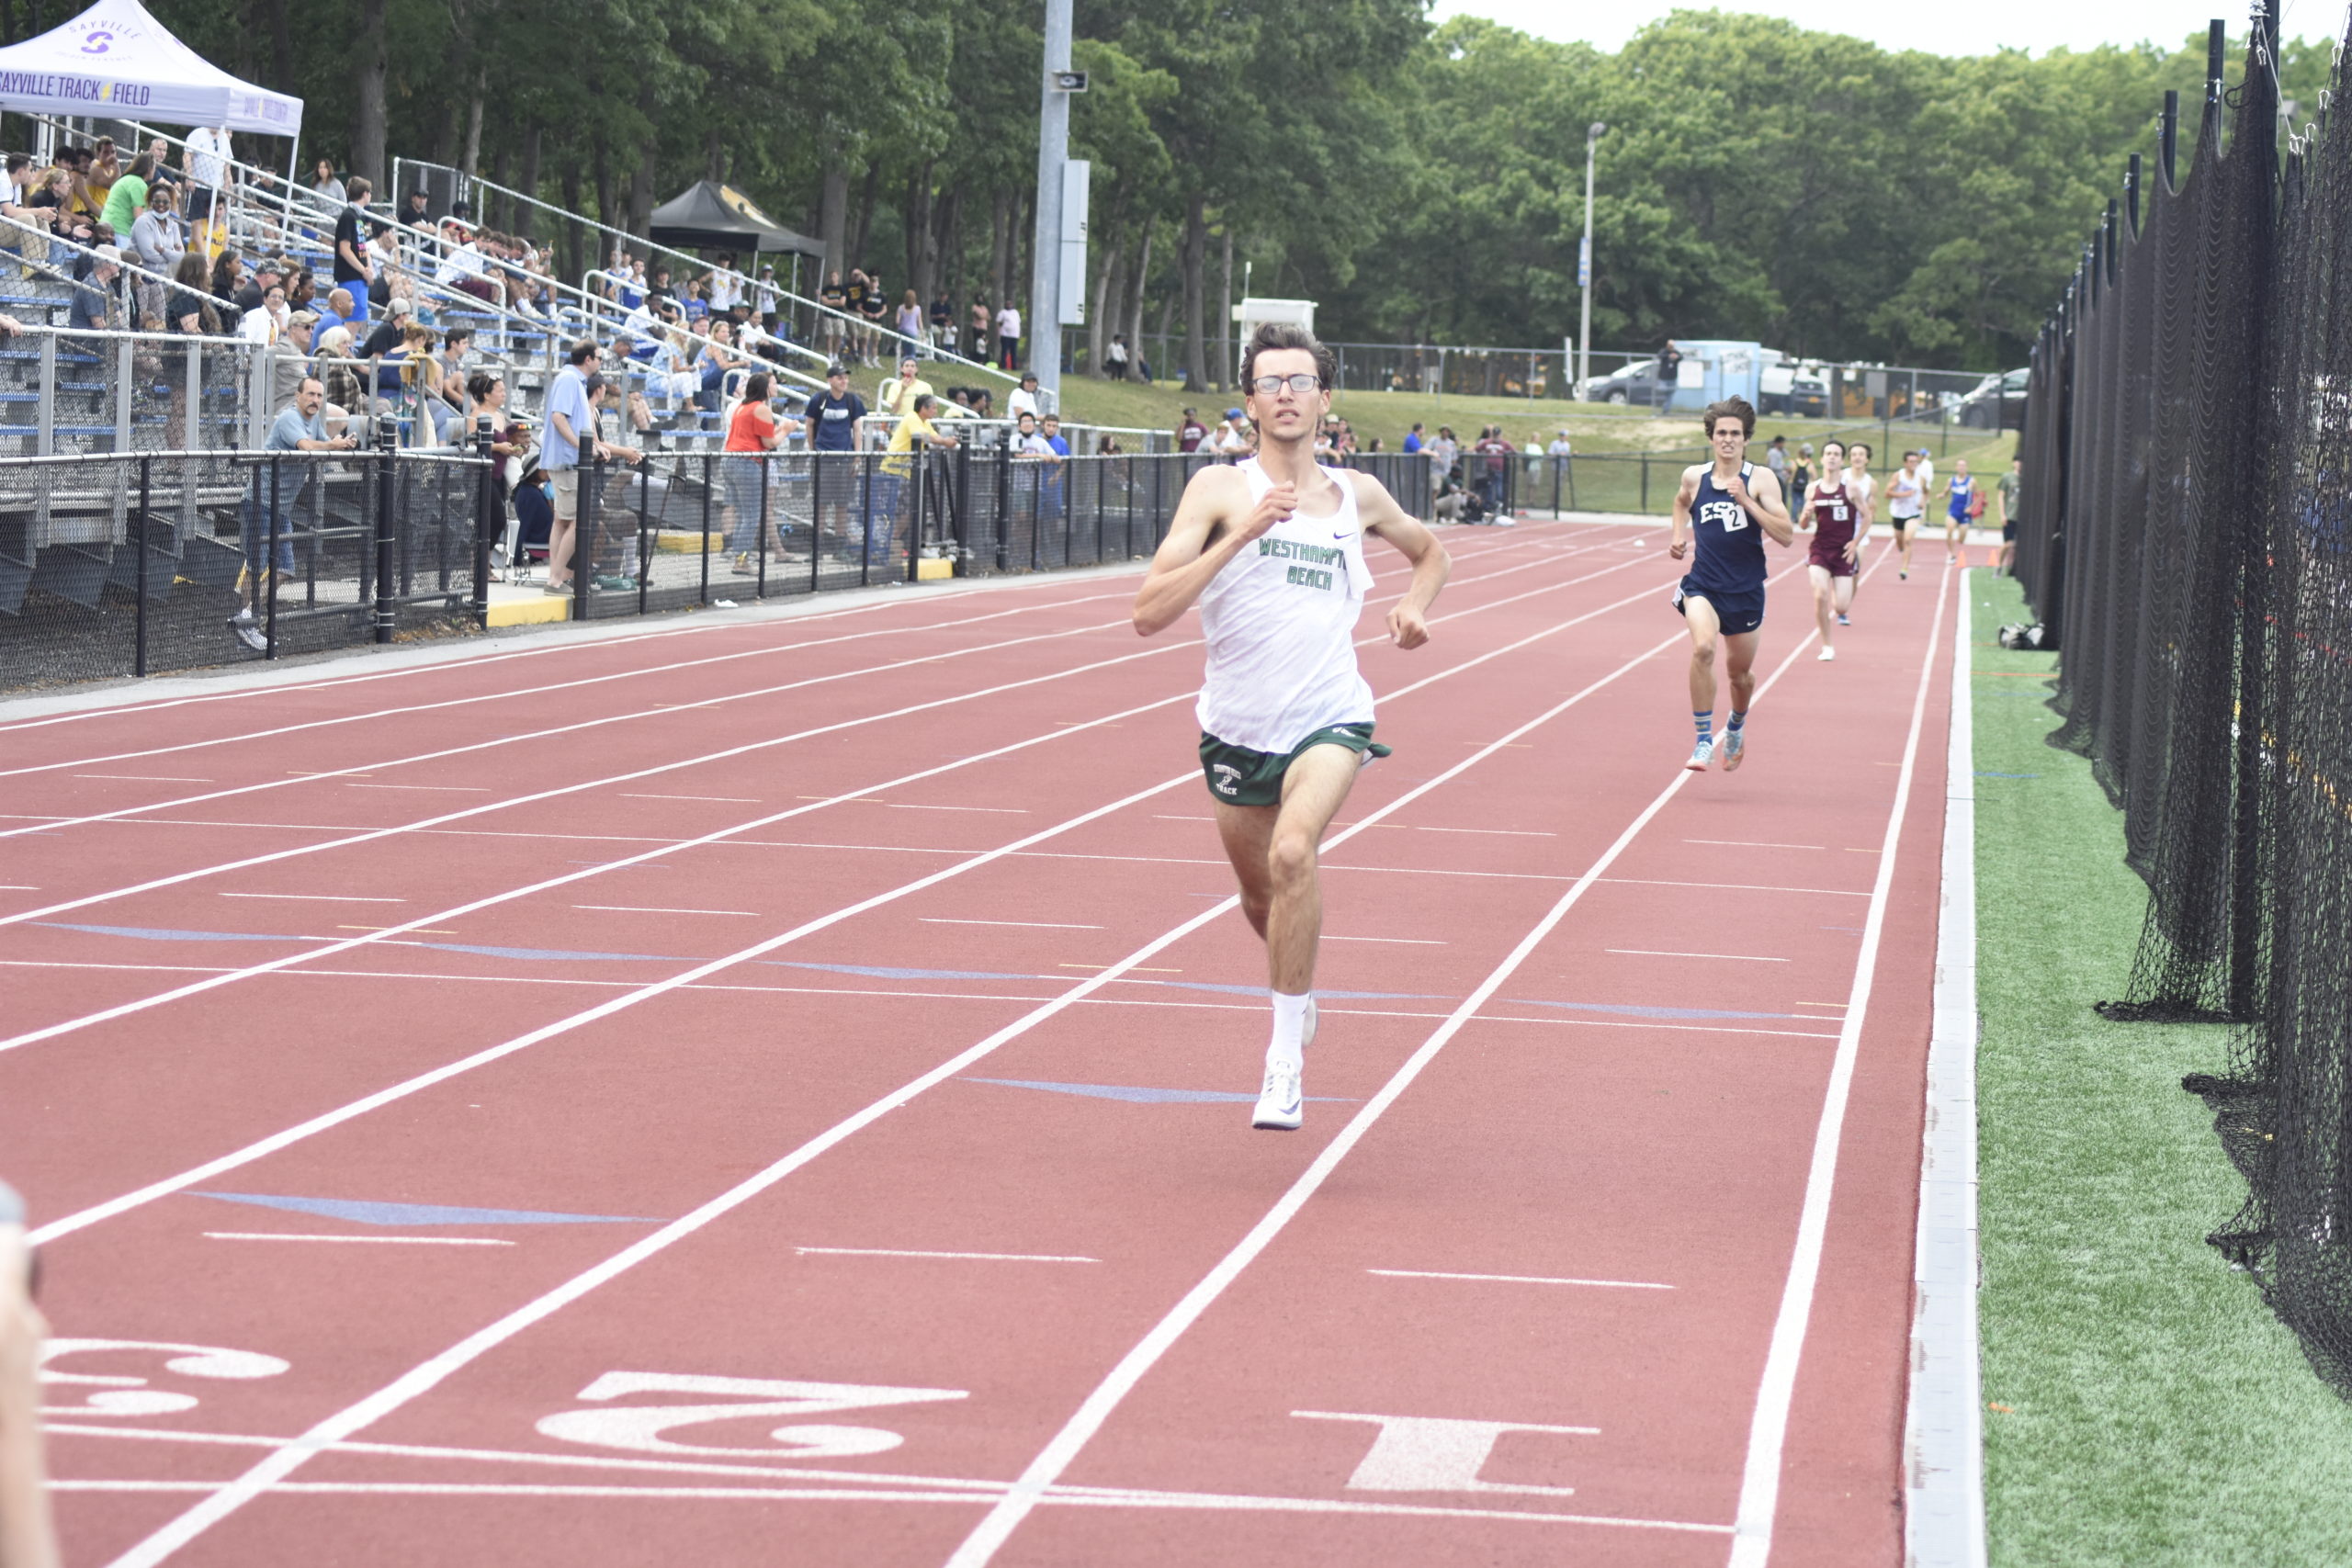 Junior Hurricane Gavin Ehlers crosses the finish line first in the 1,600-meter race to become county champion.